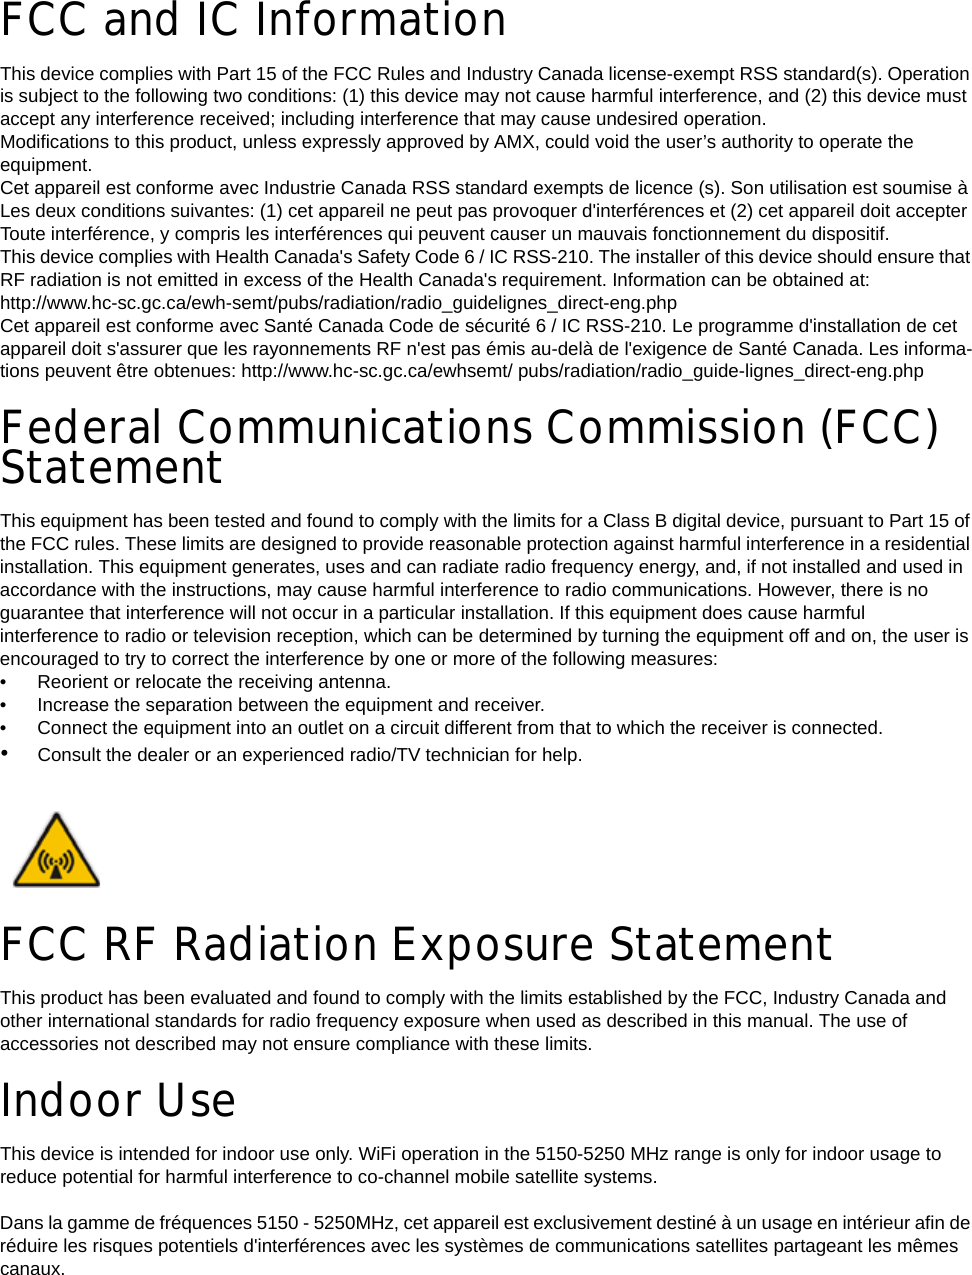 FCC and IC InformationThis device complies with Part 15 of the FCC Rules and Industry Canada license-exempt RSS standard(s). Operation is subject to the following two conditions: (1) this device may not cause harmful interference, and (2) this device must accept any interference received; including interference that may cause undesired operation.Modifications to this product, unless expressly approved by AMX, could void the user’s authority to operate the equipment.Cet appareil est conforme avec Industrie Canada RSS standard exempts de licence (s). Son utilisation est soumise à Les deux conditions suivantes: (1) cet appareil ne peut pas provoquer d&apos;interférences et (2) cet appareil doit accepter Toute interférence, y compris les interférences qui peuvent causer un mauvais fonctionnement du dispositif.This device complies with Health Canada&apos;s Safety Code 6 / IC RSS-210. The installer of this device should ensure that RF radiation is not emitted in excess of the Health Canada&apos;s requirement. Information can be obtained at: http://www.hc-sc.gc.ca/ewh-semt/pubs/radiation/radio_guidelignes_direct-eng.phpCet appareil est conforme avec Santé Canada Code de sécurité 6 / IC RSS-210. Le programme d&apos;installation de cet appareil doit s&apos;assurer que les rayonnements RF n&apos;est pas émis au-delà de l&apos;exigence de Santé Canada. Les informa-tions peuvent être obtenues: http://www.hc-sc.gc.ca/ewhsemt/ pubs/radiation/radio_guide-lignes_direct-eng.phpFederal Communications Commission (FCC) StatementThis equipment has been tested and found to comply with the limits for a Class B digital device, pursuant to Part 15 of the FCC rules. These limits are designed to provide reasonable protection against harmful interference in a residential installation. This equipment generates, uses and can radiate radio frequency energy, and, if not installed and used in accordance with the instructions, may cause harmful interference to radio communications. However, there is no guarantee that interference will not occur in a particular installation. If this equipment does cause harmful interference to radio or television reception, which can be determined by turning the equipment off and on, the user is encouraged to try to correct the interference by one or more of the following measures: • Reorient or relocate the receiving antenna.• Increase the separation between the equipment and receiver.• Connect the equipment into an outlet on a circuit different from that to which the receiver is connected.•Consult the dealer or an experienced radio/TV technician for help.FCC RF Radiation Exposure StatementThis product has been evaluated and found to comply with the limits established by the FCC, Industry Canada and other international standards for radio frequency exposure when used as described in this manual. The use of accessories not described may not ensure compliance with these limits.Indoor UseThis device is intended for indoor use only. WiFi operation in the 5150-5250 MHz range is only for indoor usage to reduce potential for harmful interference to co-channel mobile satellite systems.Dans la gamme de fréquences 5150 - 5250MHz, cet appareil est exclusivement destiné à un usage en intérieur afin de réduire les risques potentiels d&apos;interférences avec les systèmes de communications satellites partageant les mêmes canaux.